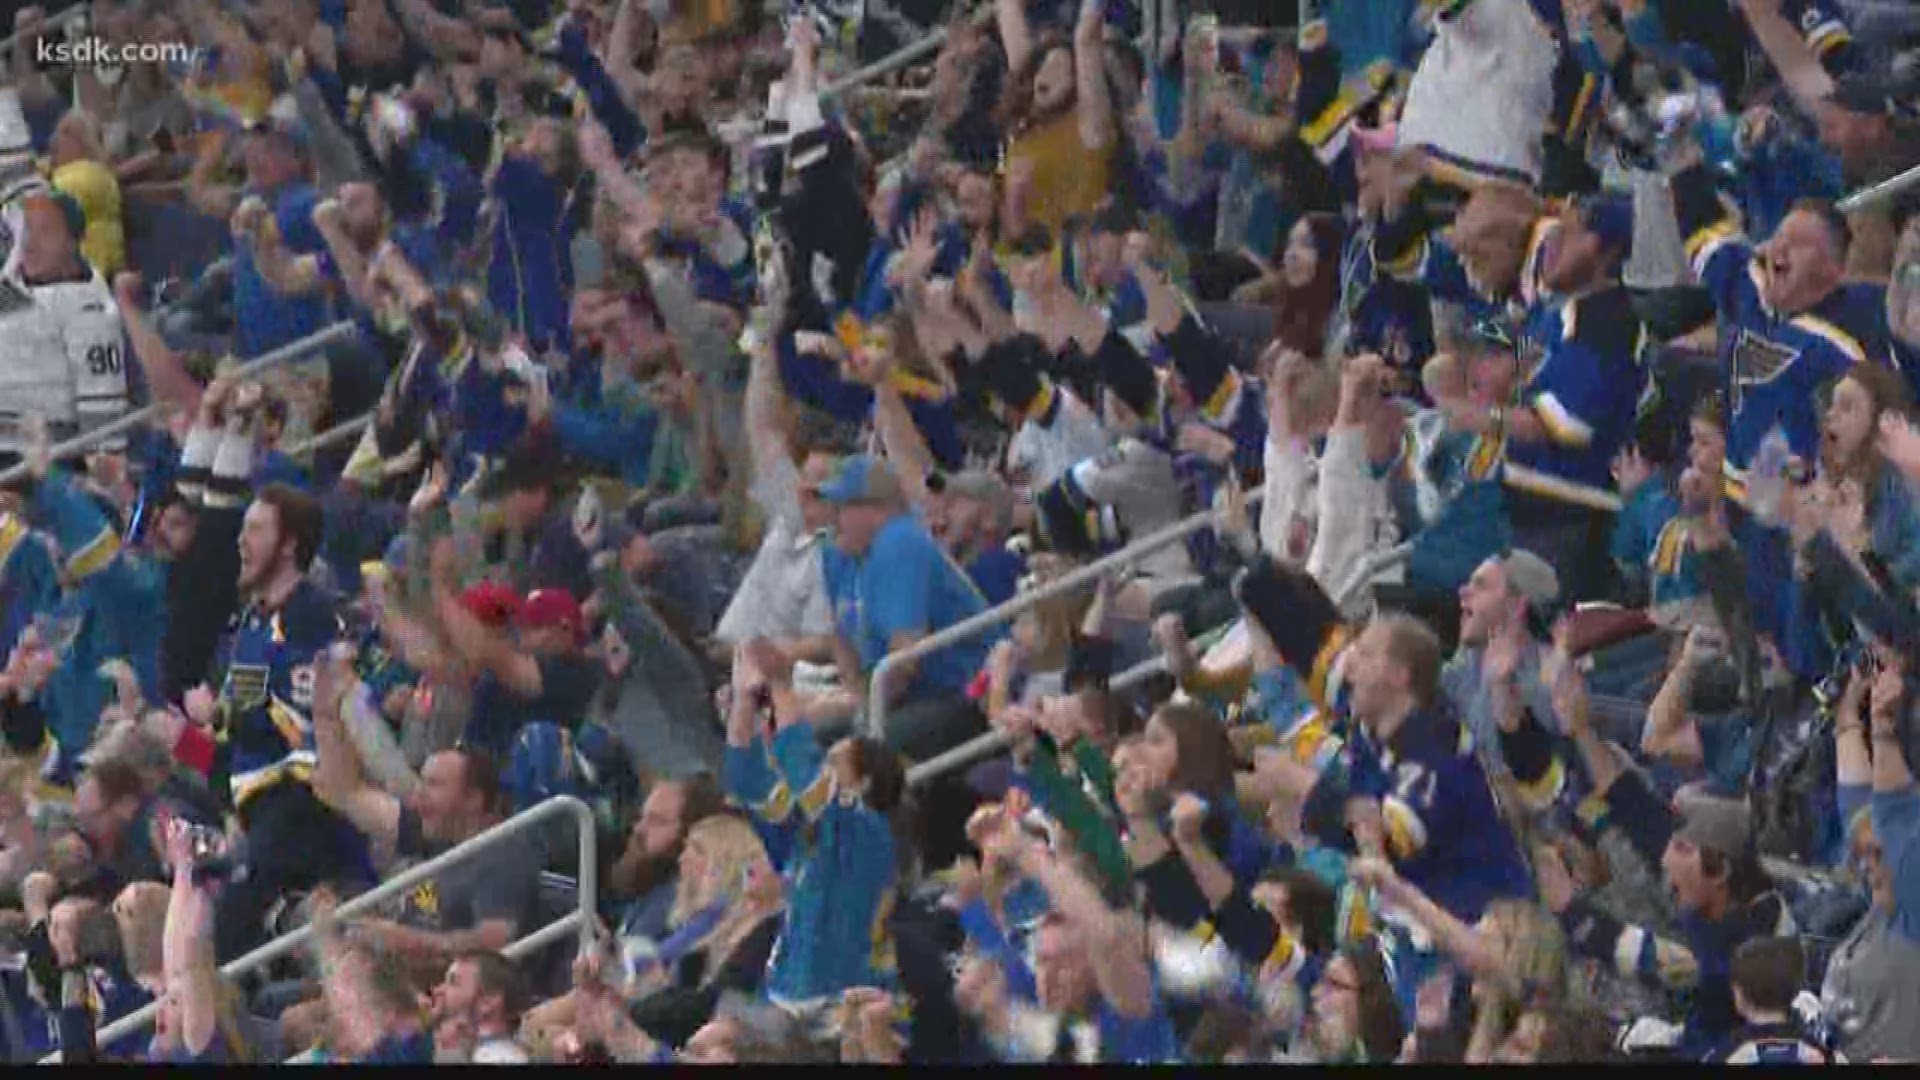 St. Louis Blues - Reminder for fans joining us today: Enterprise